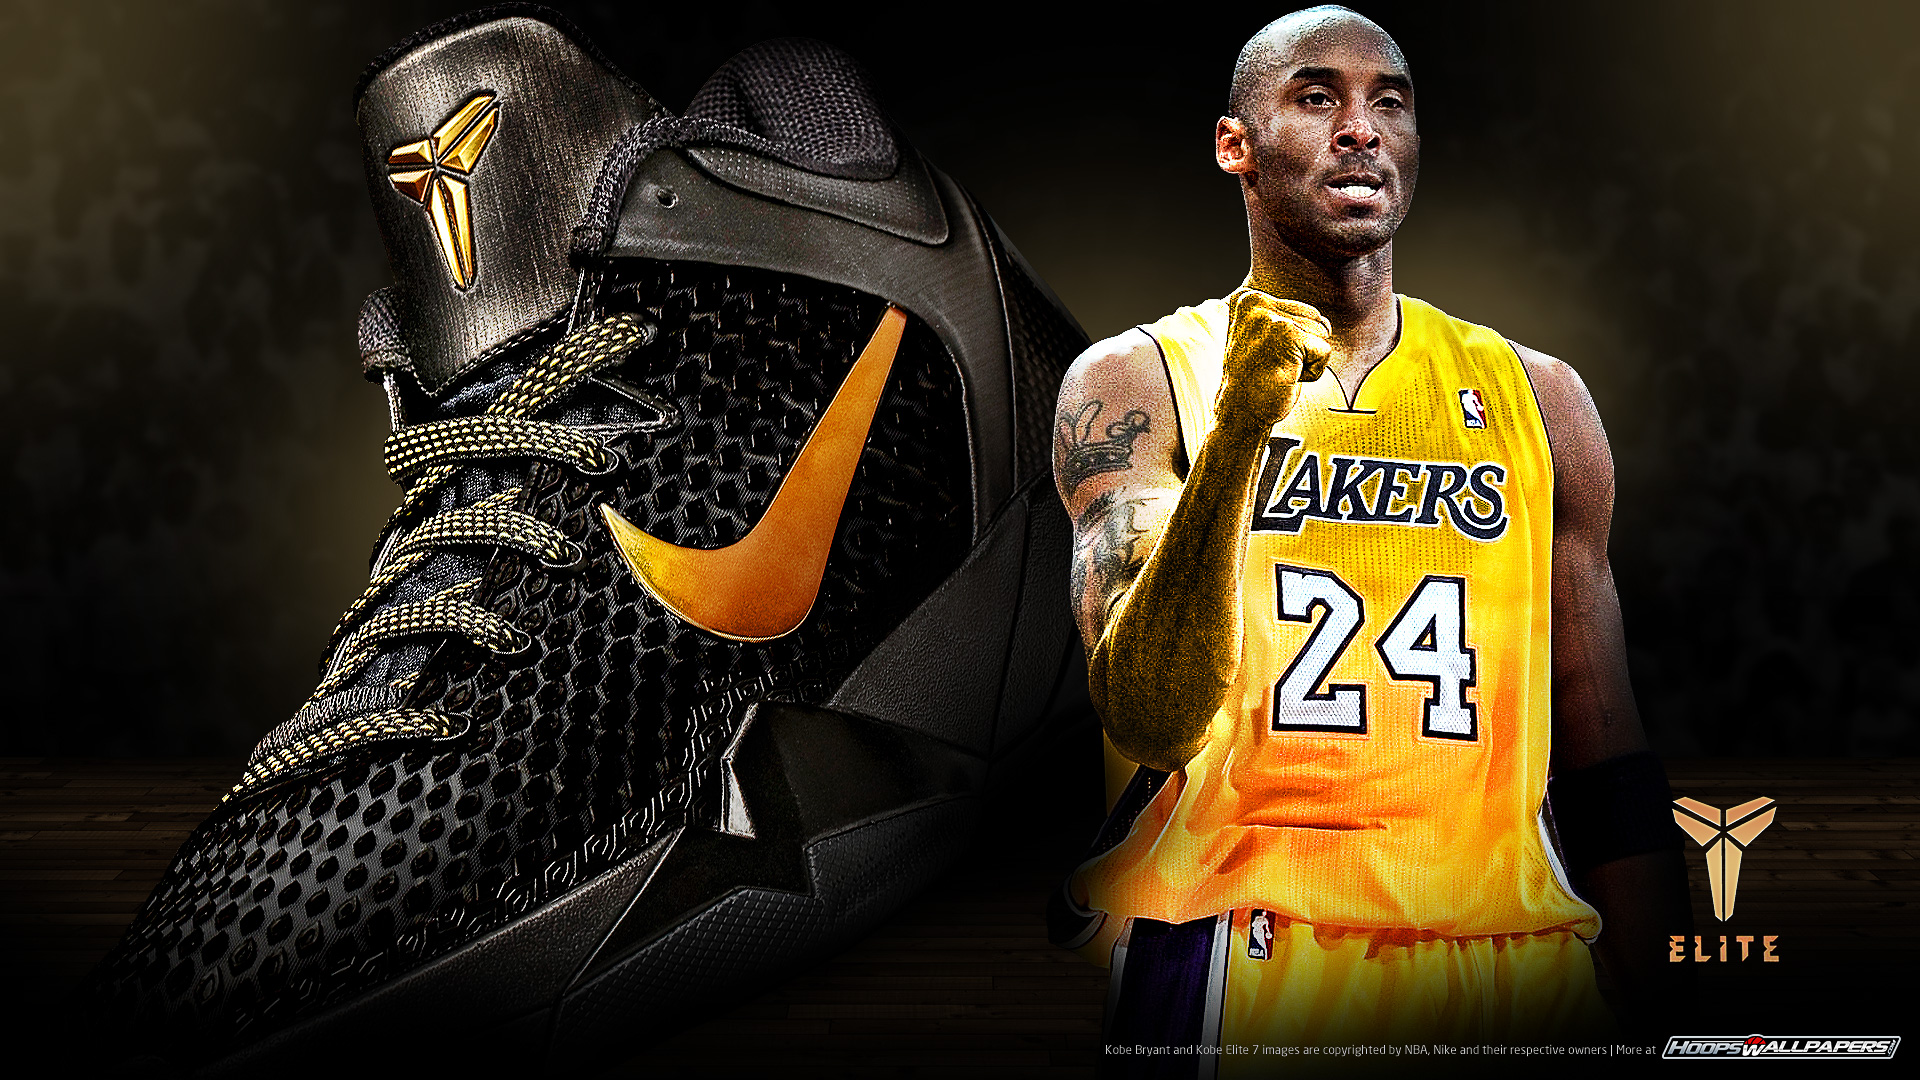 HoopsWallpapers.com – Get the latest HD and mobile NBA wallpapers today! » Kobe Bryant1920 x 1080